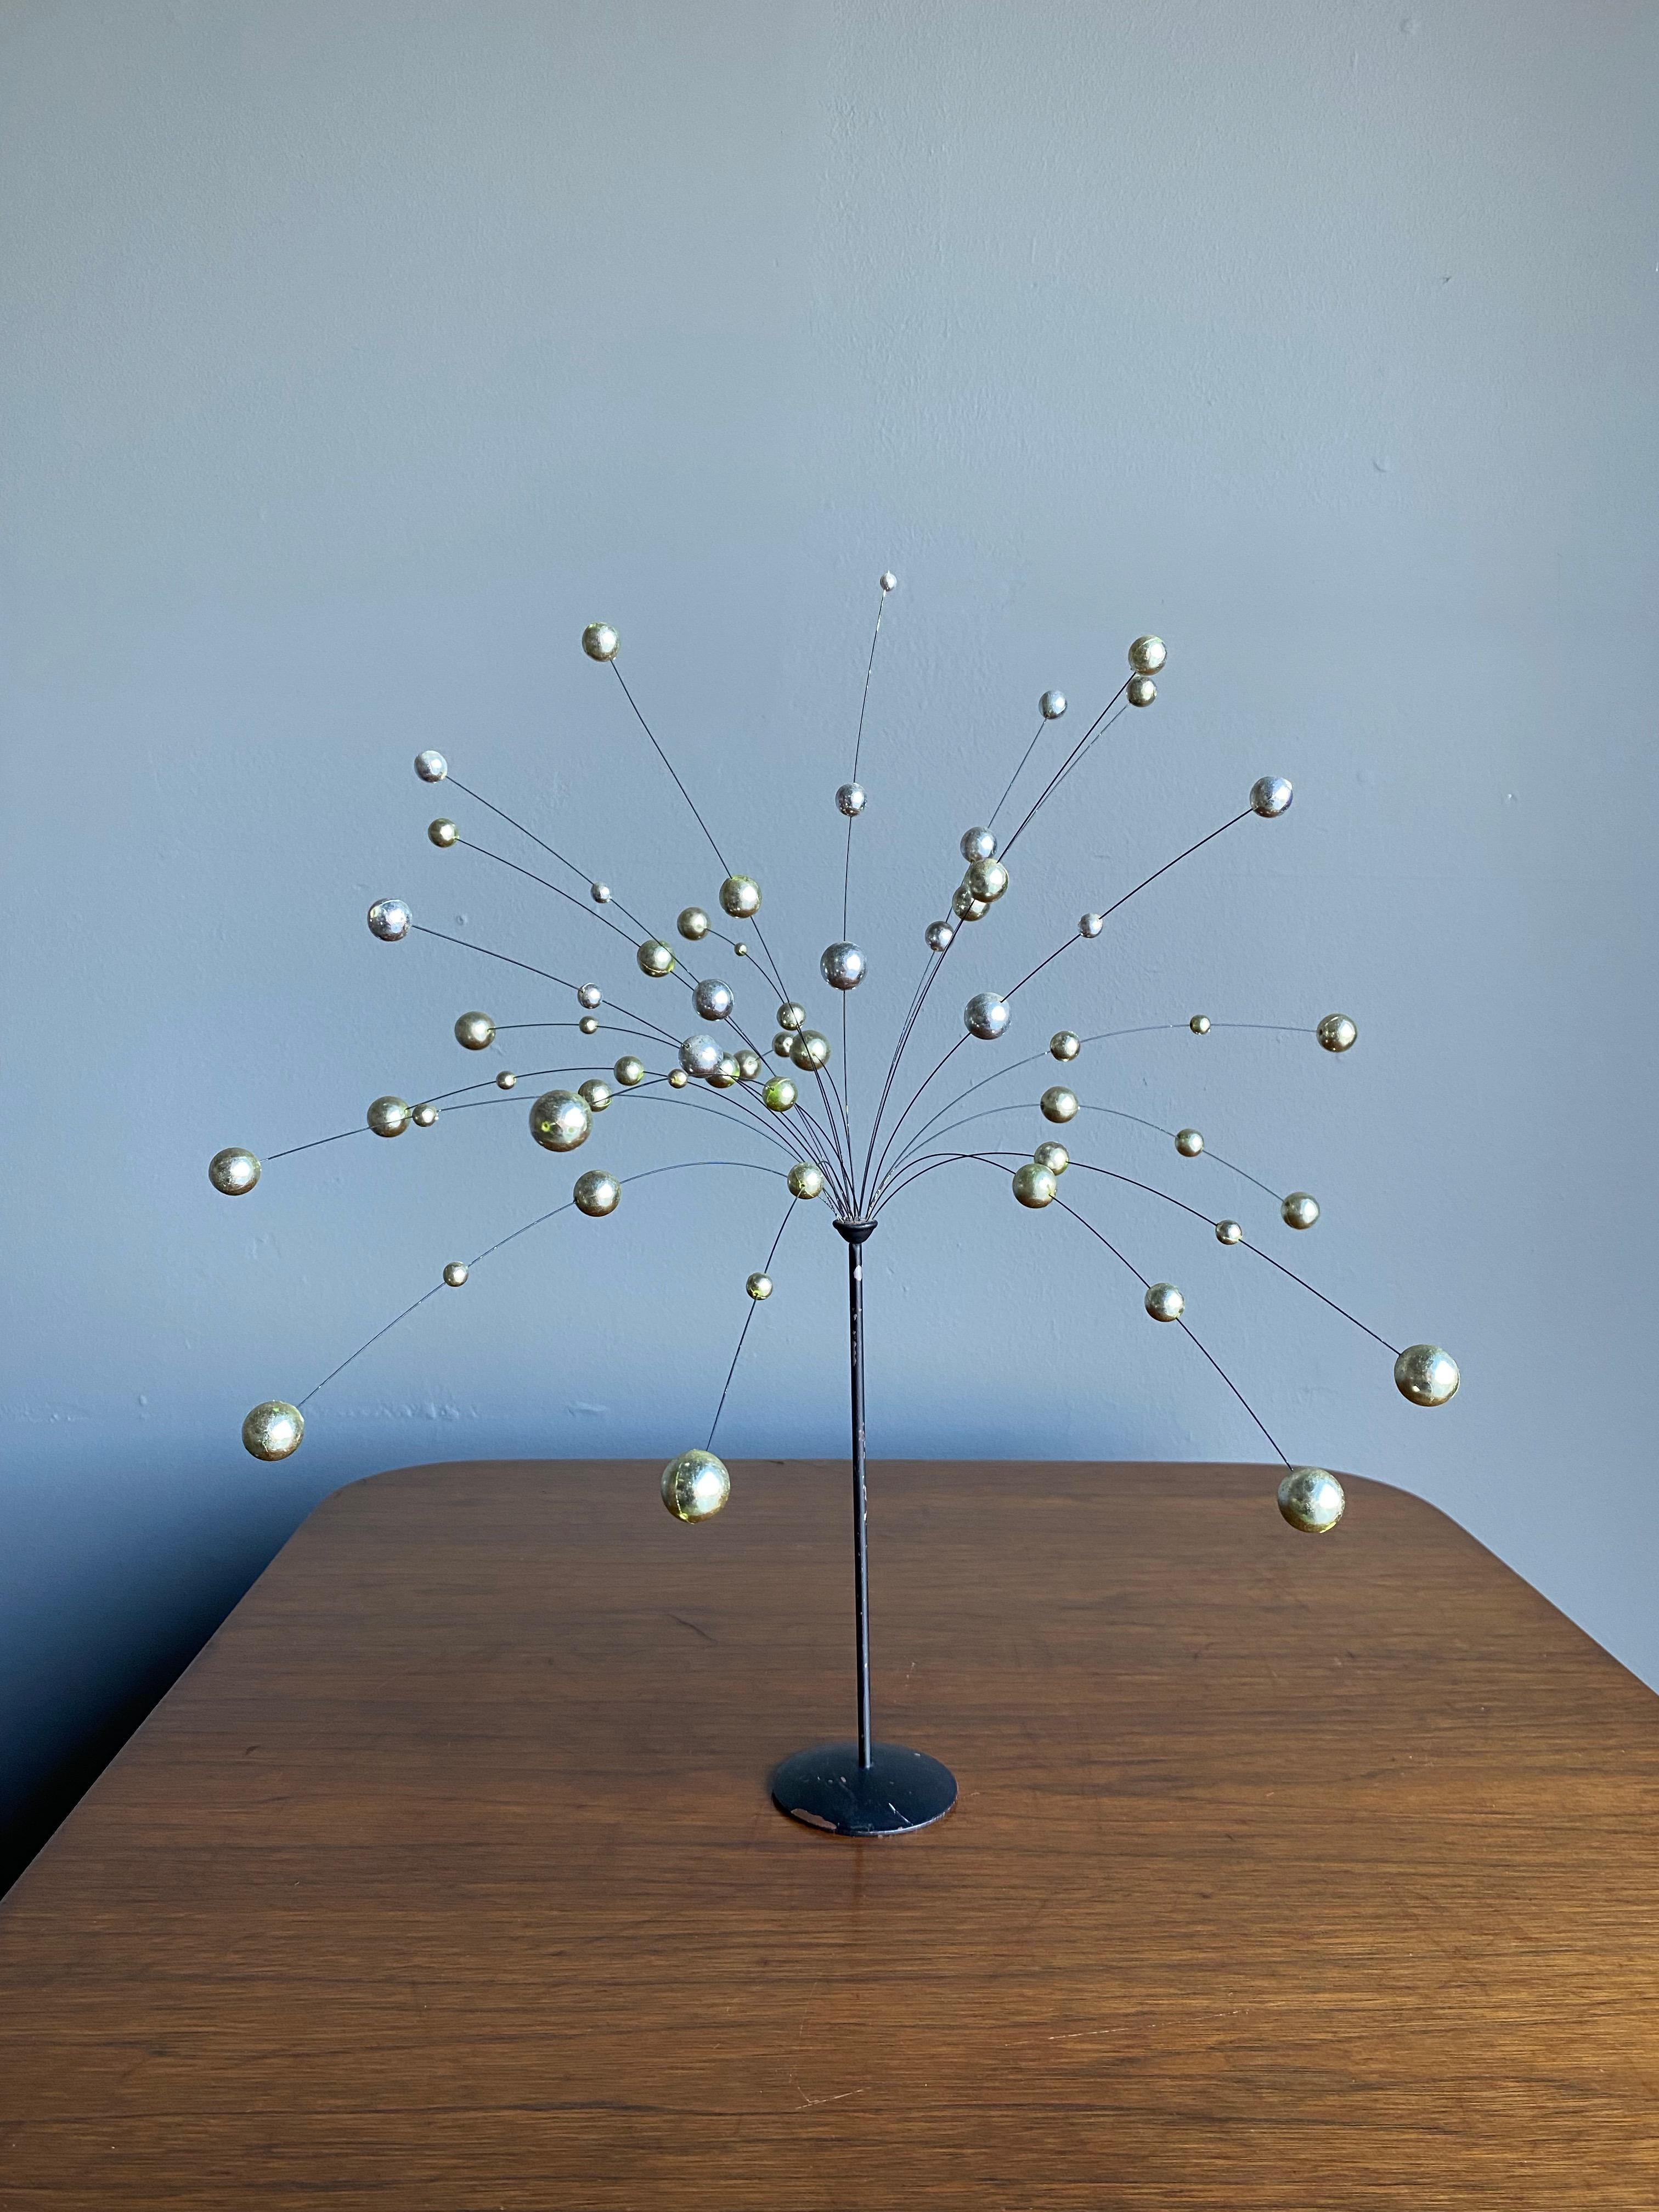 Vintage kinetic sculpture by Laurids Lonborg circa 1955.